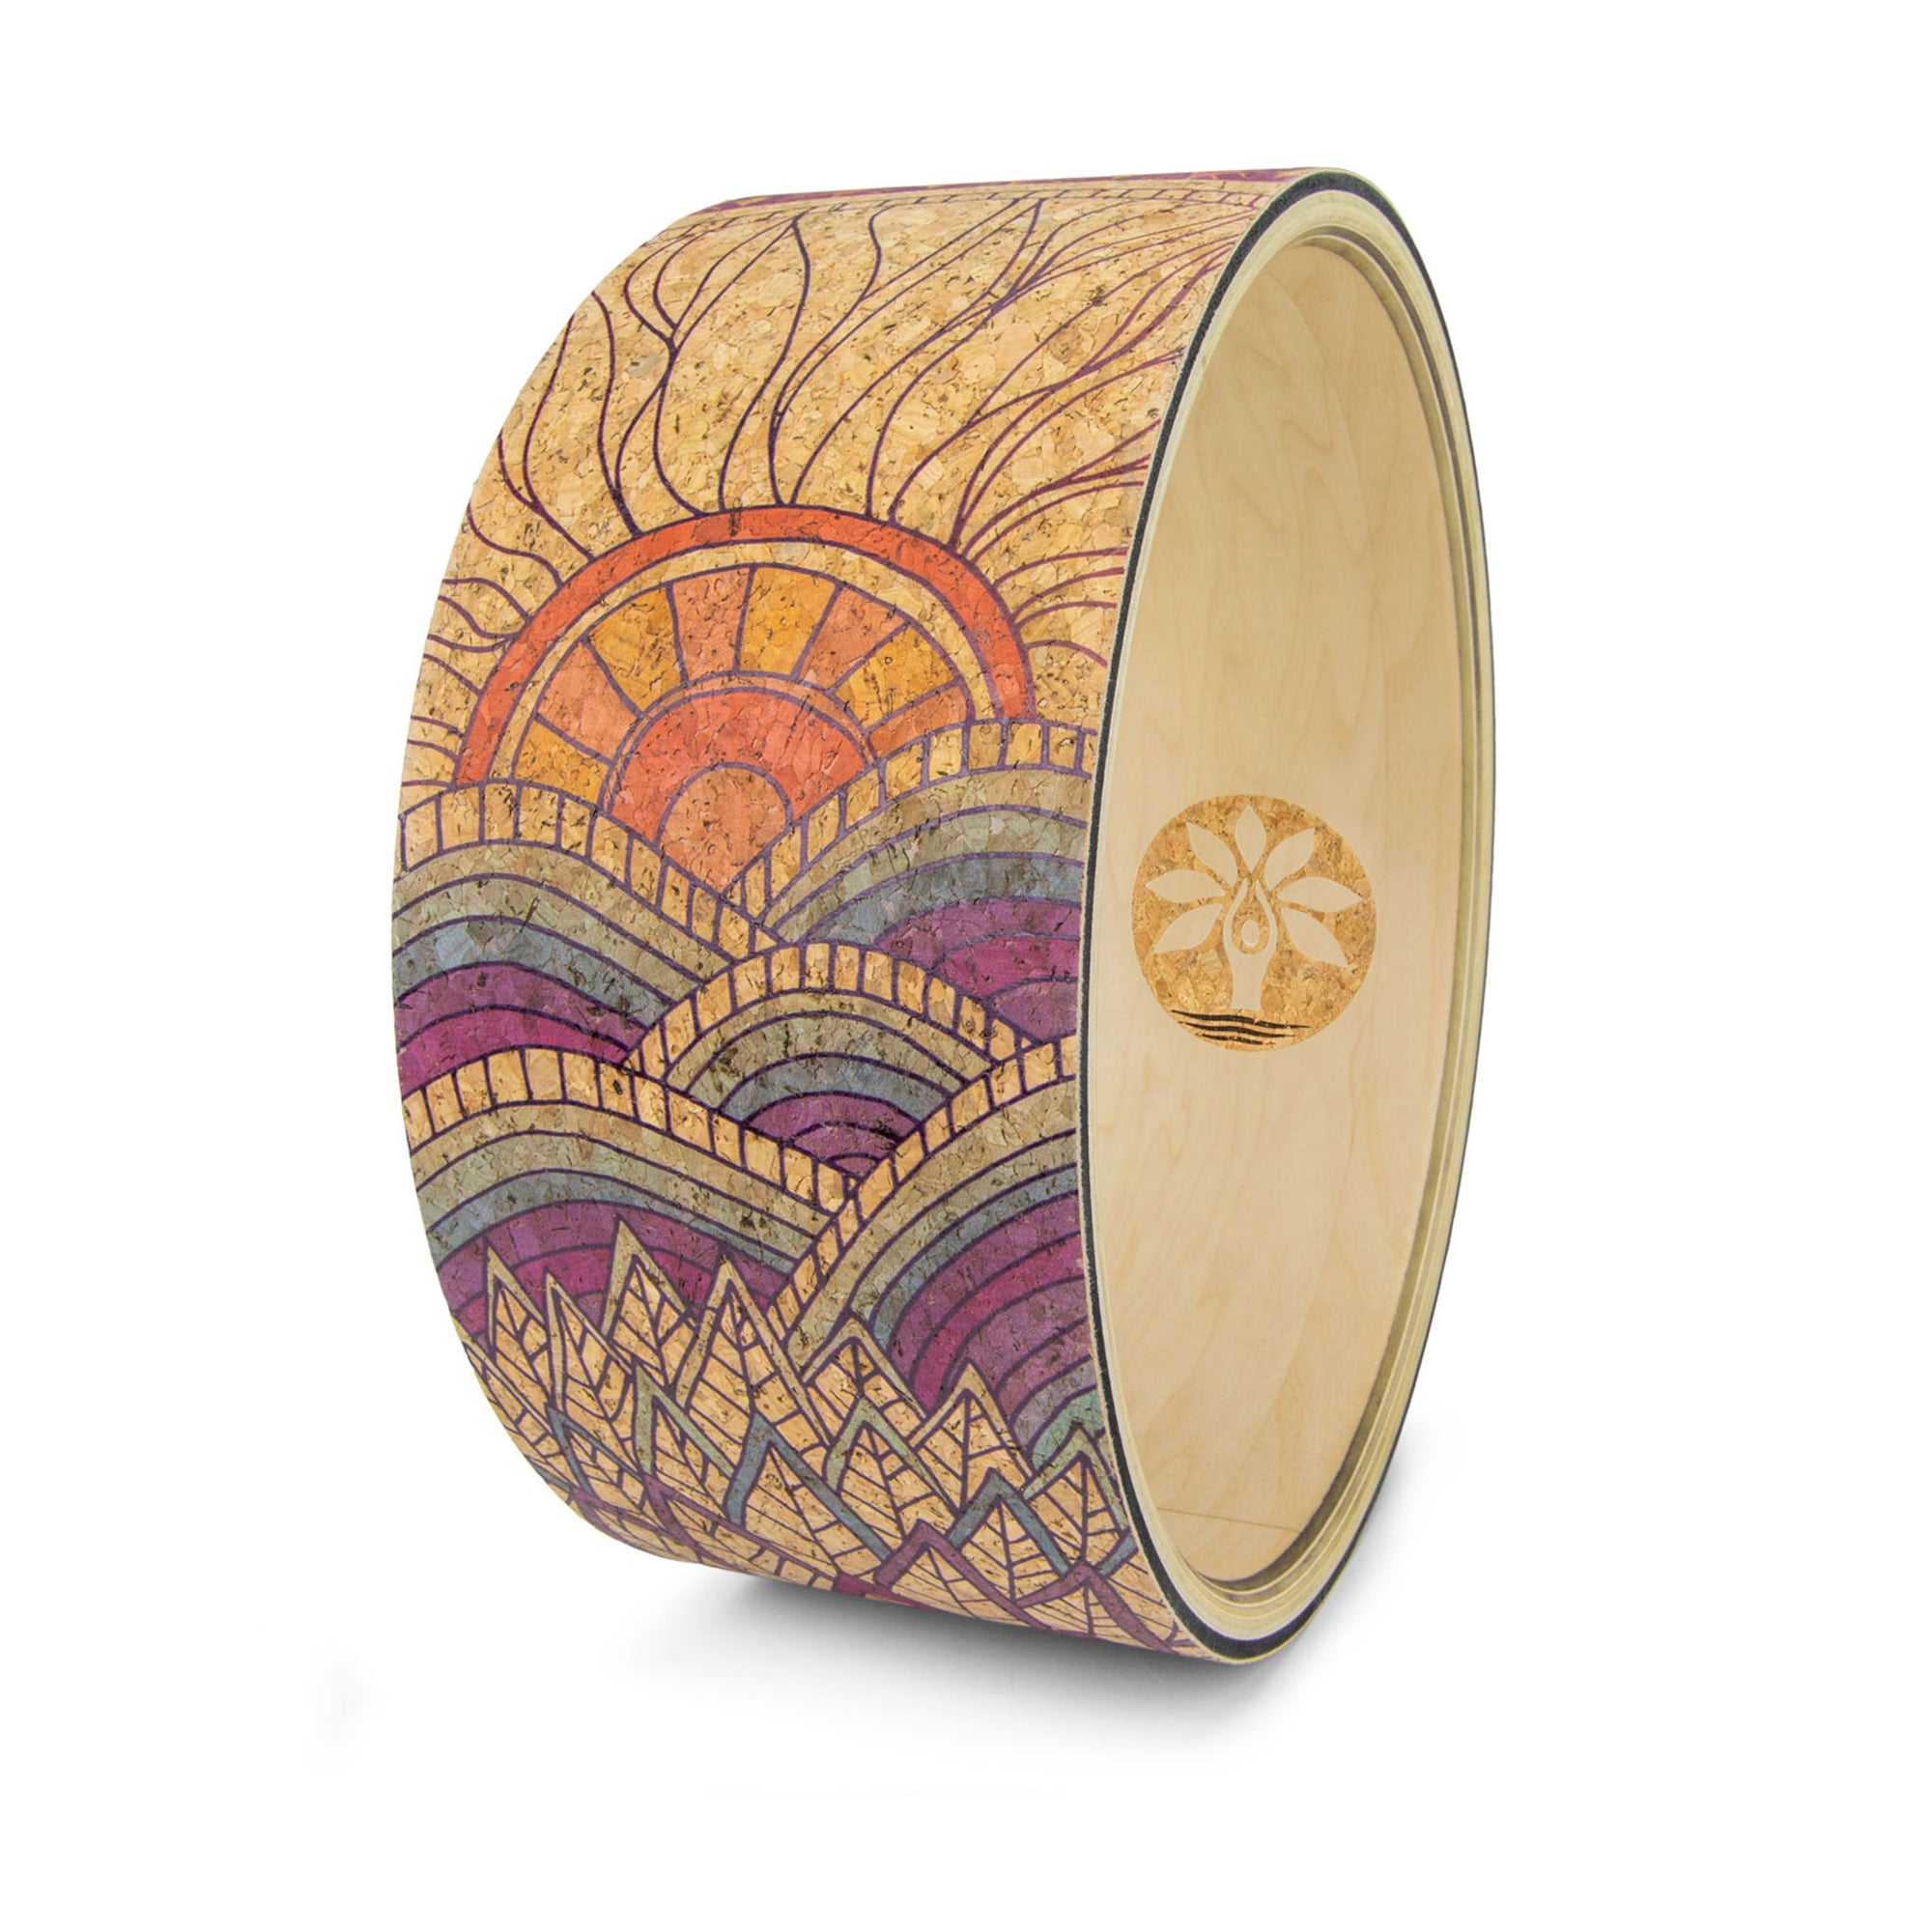 The Best Yoga Wheel - Handmade with Eco-Friendly Cork and Wood